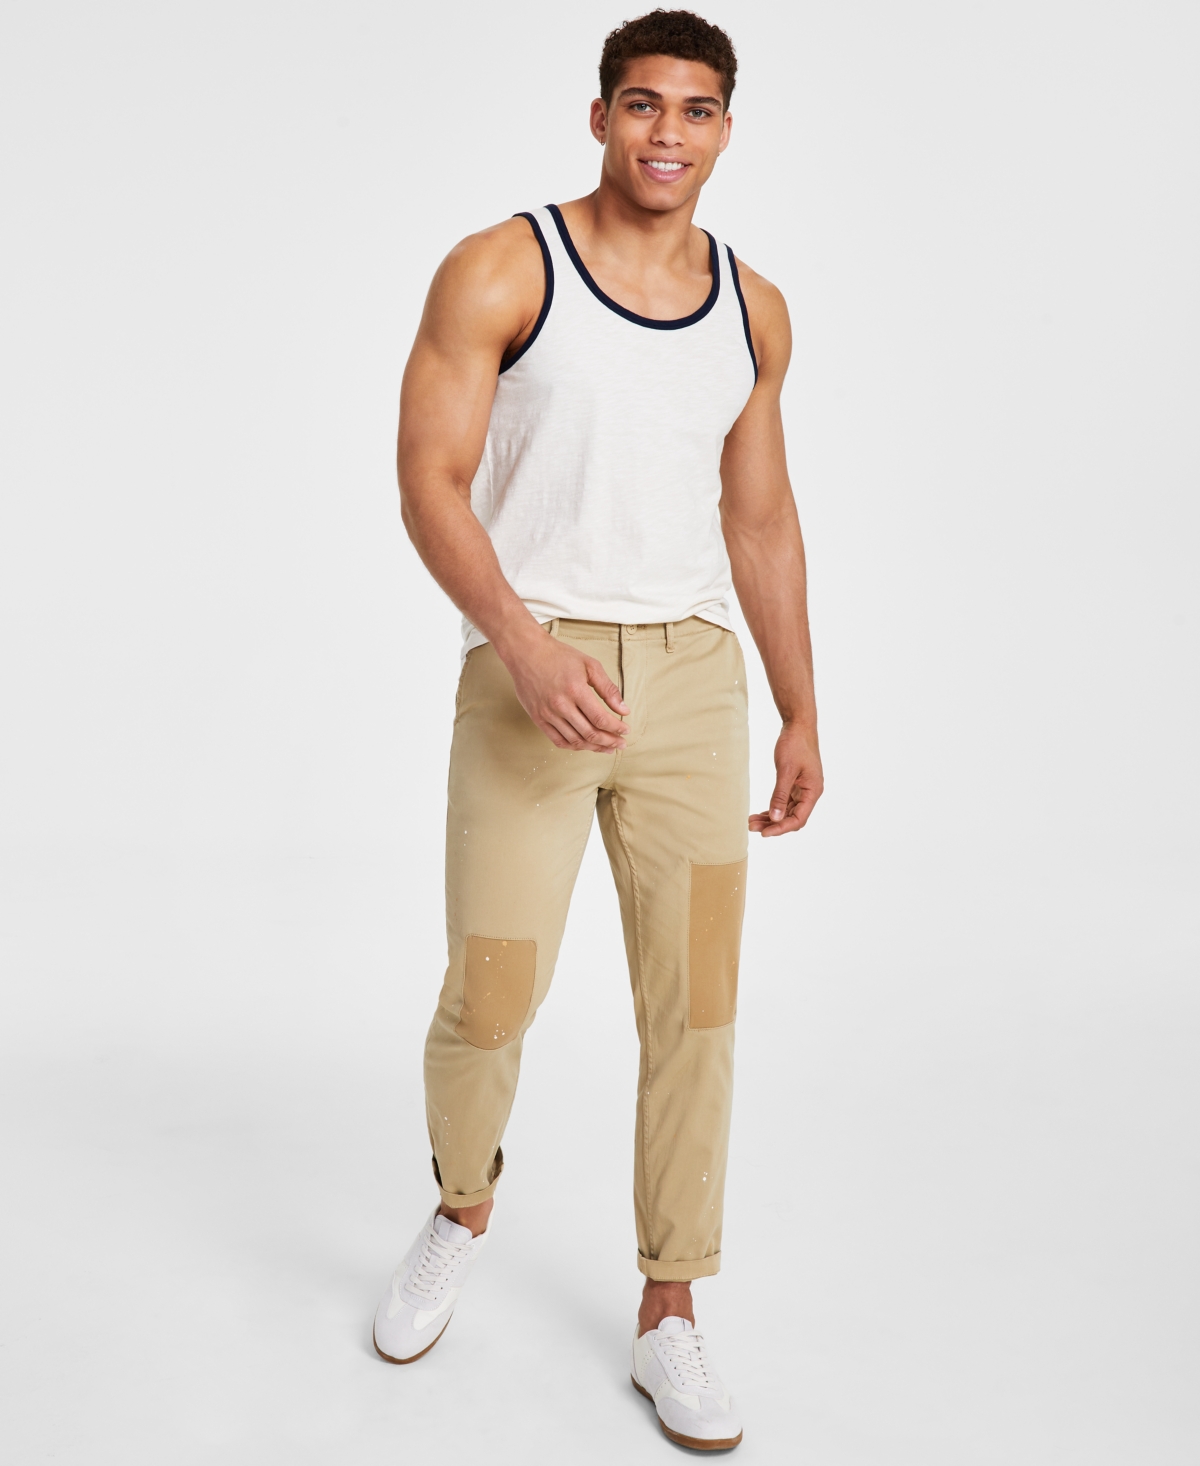 Sun + Stone Men's Dyan Sleeveless Contrast Trim Tank, Created For Macy's In Vintage White